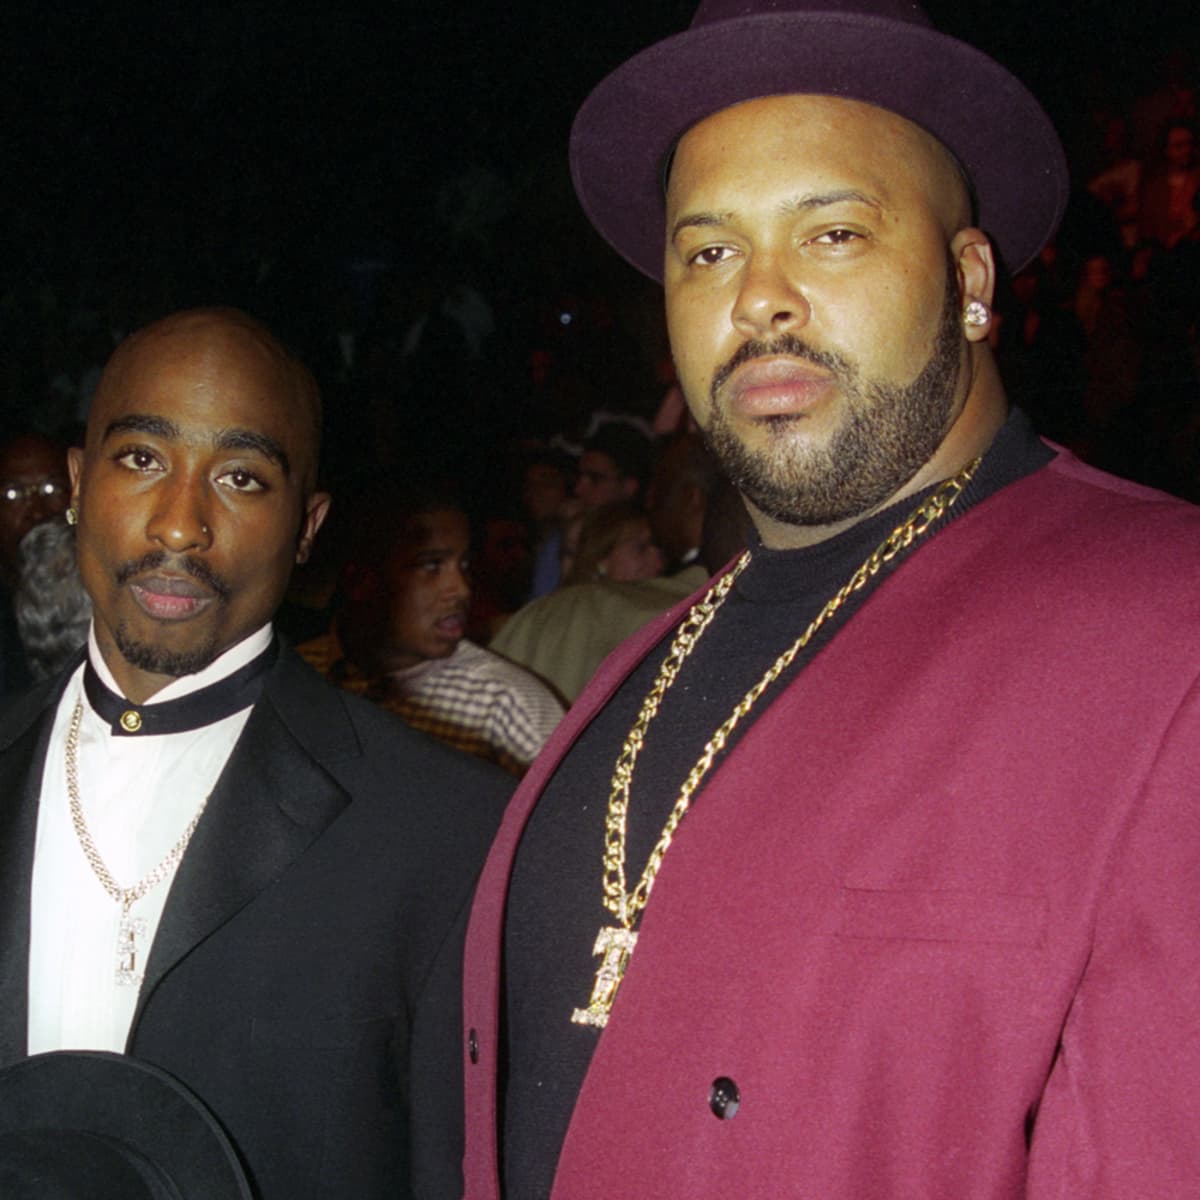 2Pac and Dr. Dre Albums Reportedly Not Included in Snoop Dogg's Death Row  Purchase